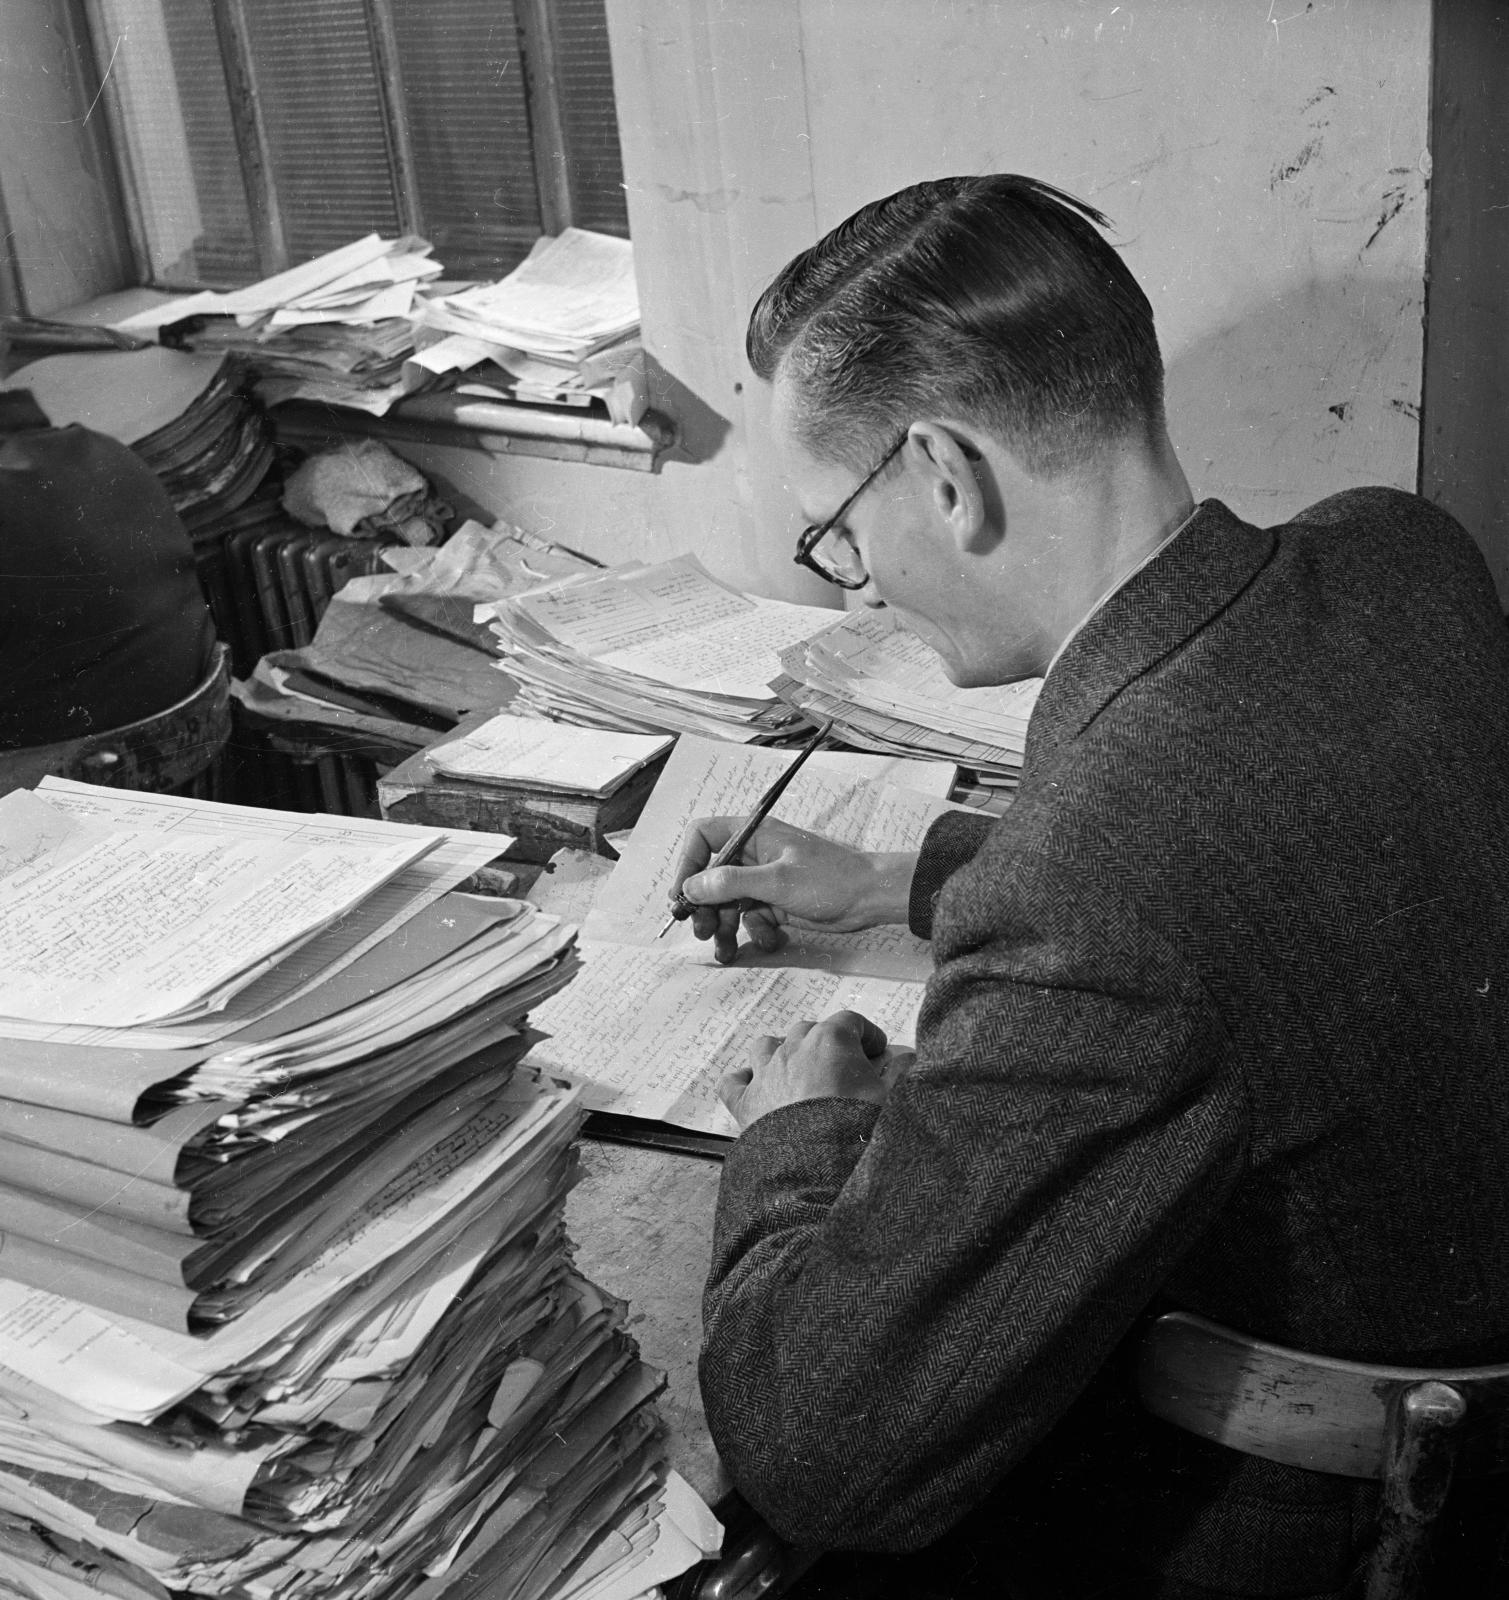 A man wearing a suit writing at desk surround by piles of paper